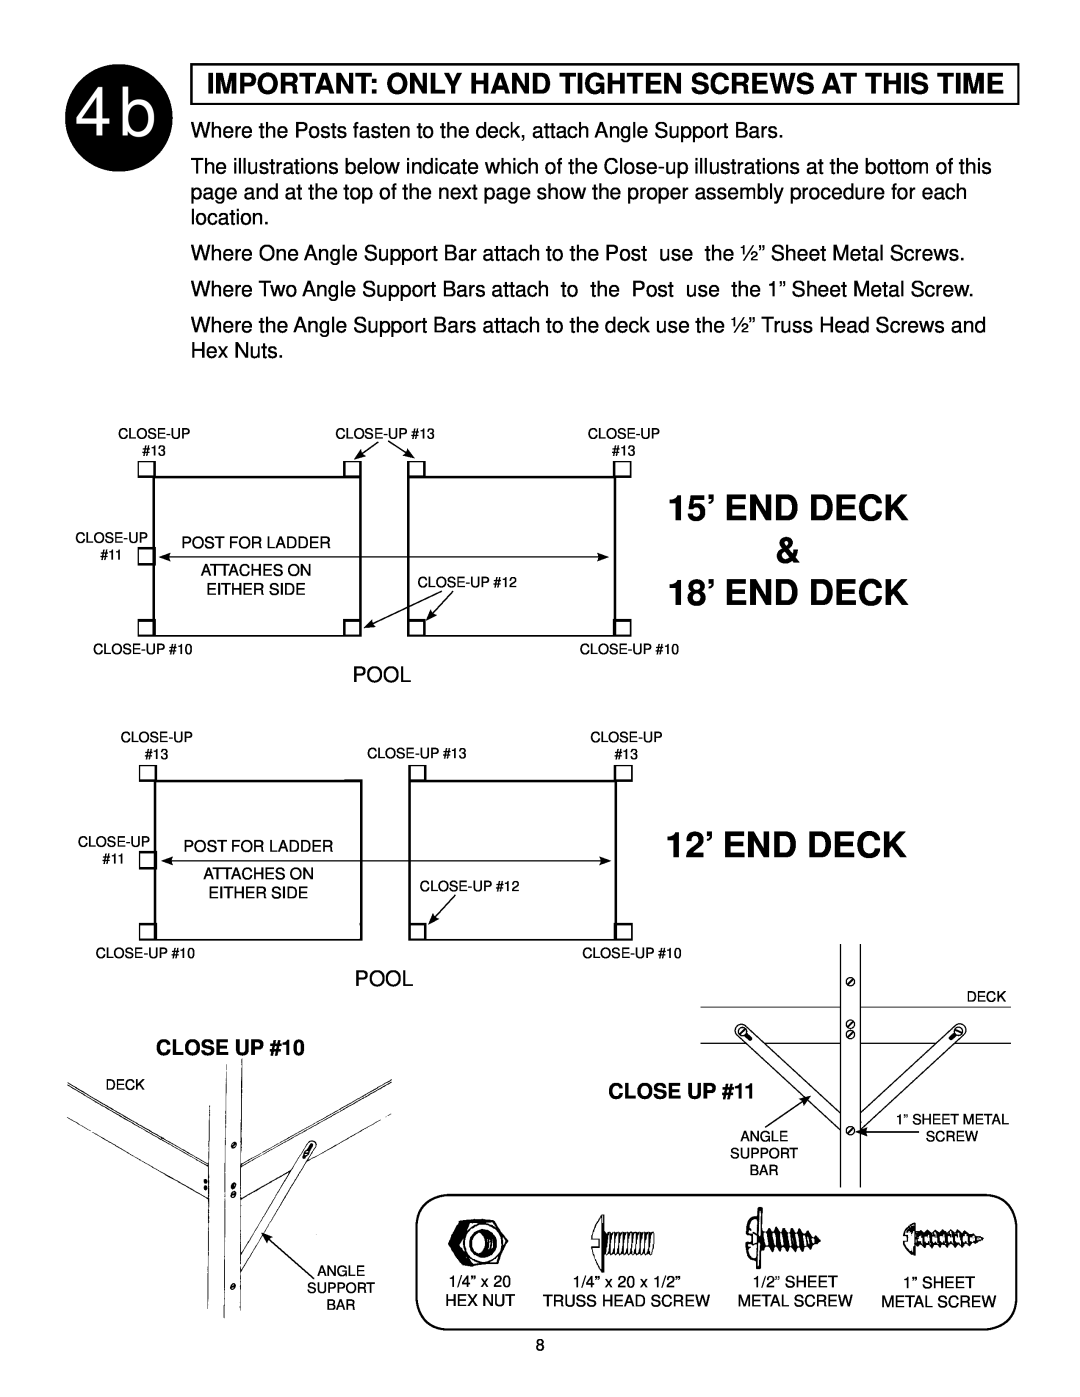 Swim'n Play end deck manual 15’ END DECK & 18’ END DECK, 12’ END DECK, Important Only Hand Tighten Screws At This Time 